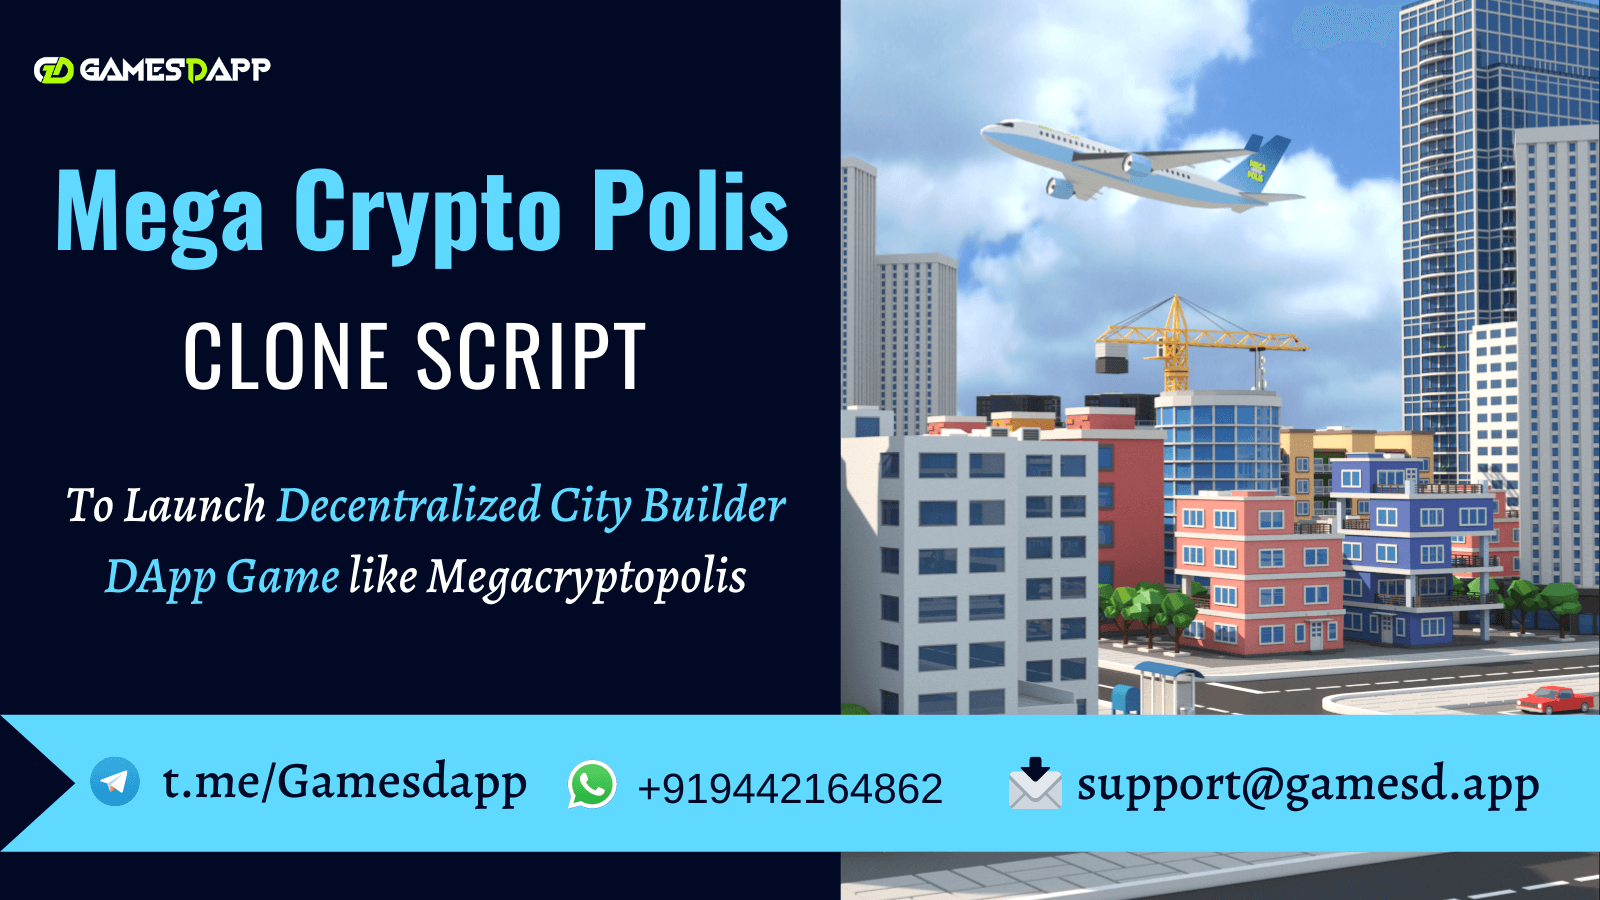 Megacryptopolis Clone Script - To Build Decentralized City Builder Strategy Game on Different Blockchain Networks